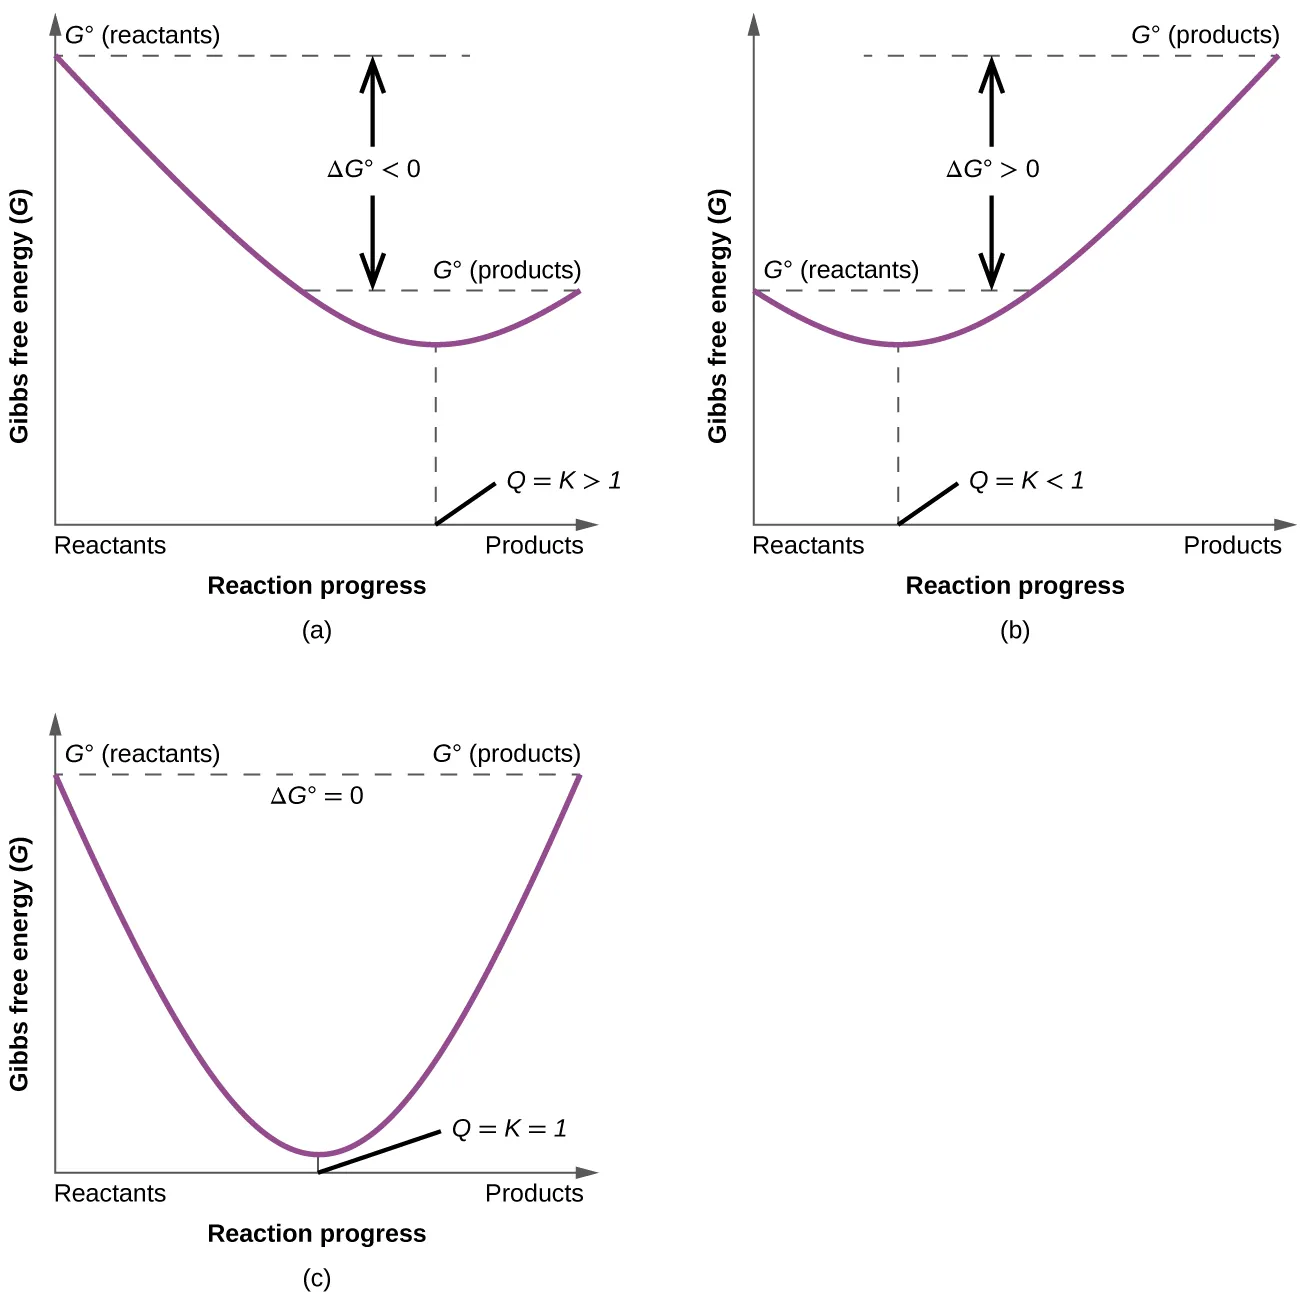 Three graphs, labeled, “a,” “b,” and “c” are shown where the y-axis is labeled, “Gibbs free energy ( G ),” and, “G superscript degree sign ( reactants ),” while the x-axis is labeled, “Reaction progress,” and “Reactants,” on the left and, “Products,” on the right. In graph a, a line begins at the upper left side and goes steadily down to a point about halfway up the y-axis and two thirds of the way on the x-axis, then rises again to a point labeled, “G superscript degree sign ( products ),” that is slightly higher than halfway up the y-axis. The distance between the beginning and ending points of the graph is labeled as, “delta G less than 0,” while the lowest point on the graph is labeled, “Q equals K greater than 1.” In graph b, a line begins at the middle left side and goes steadily down to a point about two fifths up the y-axis and one third of the way on the x-axis, then rises again to a point labeled, “G superscript degree sign ( products ),” that is near the top of the y-axis. The distance between the beginning and ending points of the graph is labeled as, “delta G greater than 0,” while the lowest point on the graph is labeled, “Q equals K less than 1.” In graph c, a line begins at the upper left side and goes steadily down to a point near the bottom of the y-axis and half way on the x-axis, then rises again to a point labeled, “G superscript degree sign ( products ),” that is equal to the starting point on the y-axis which is labeled, “G superscript degree sign ( reactants ).” The lowest point on the graph is labeled, “Q equals K equals 1.” At the top of the graph is the label, “Delta G superscript degree sign equals 0.”